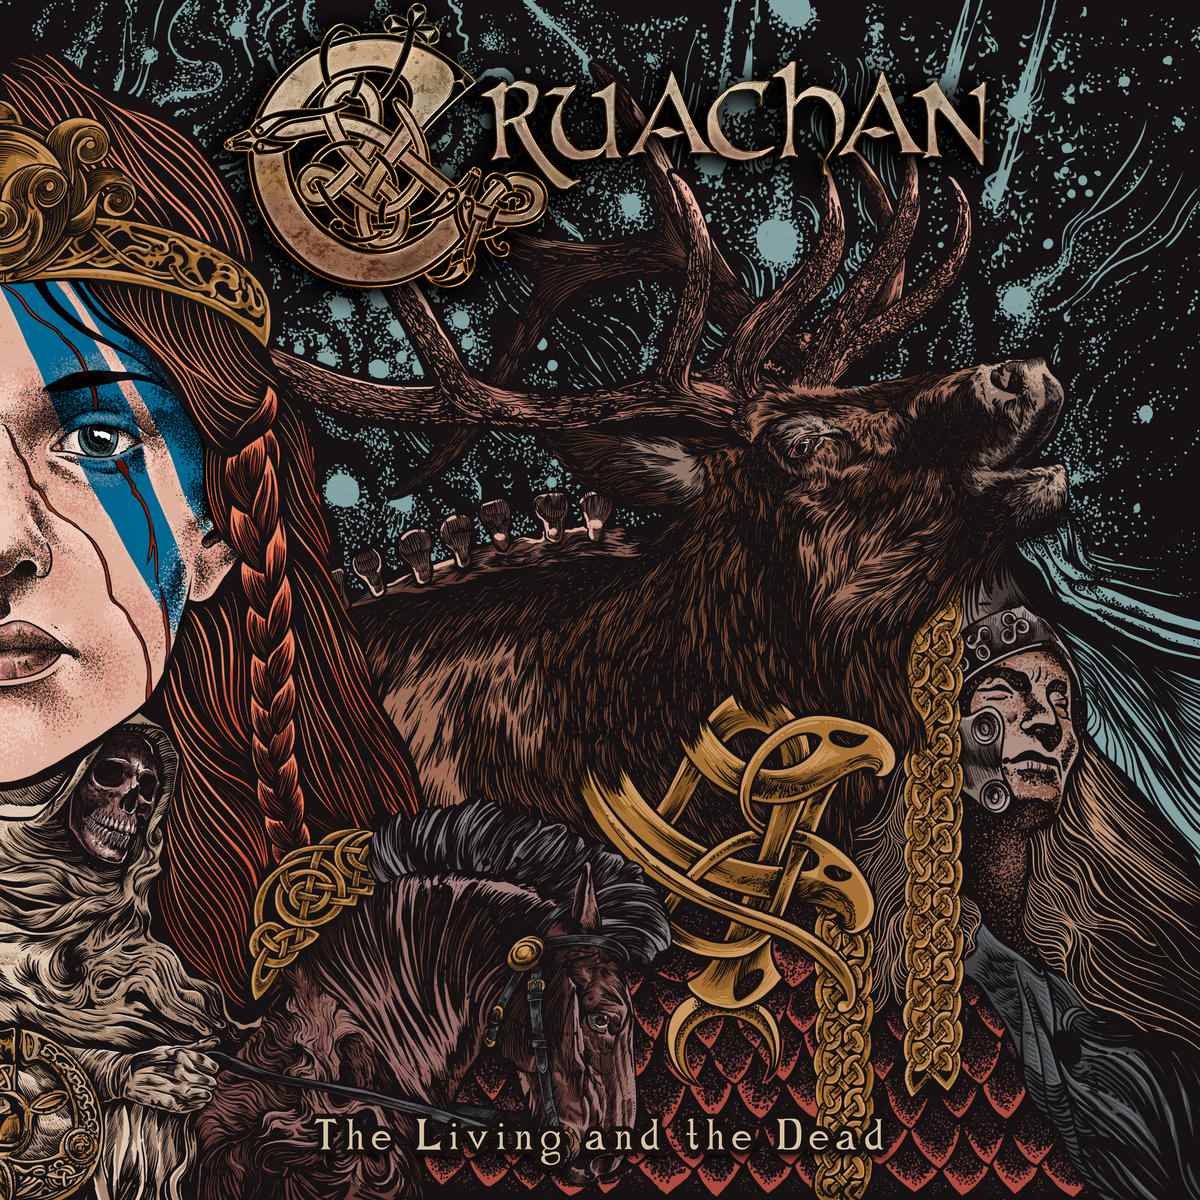 Cruachan – The Living and the Dead